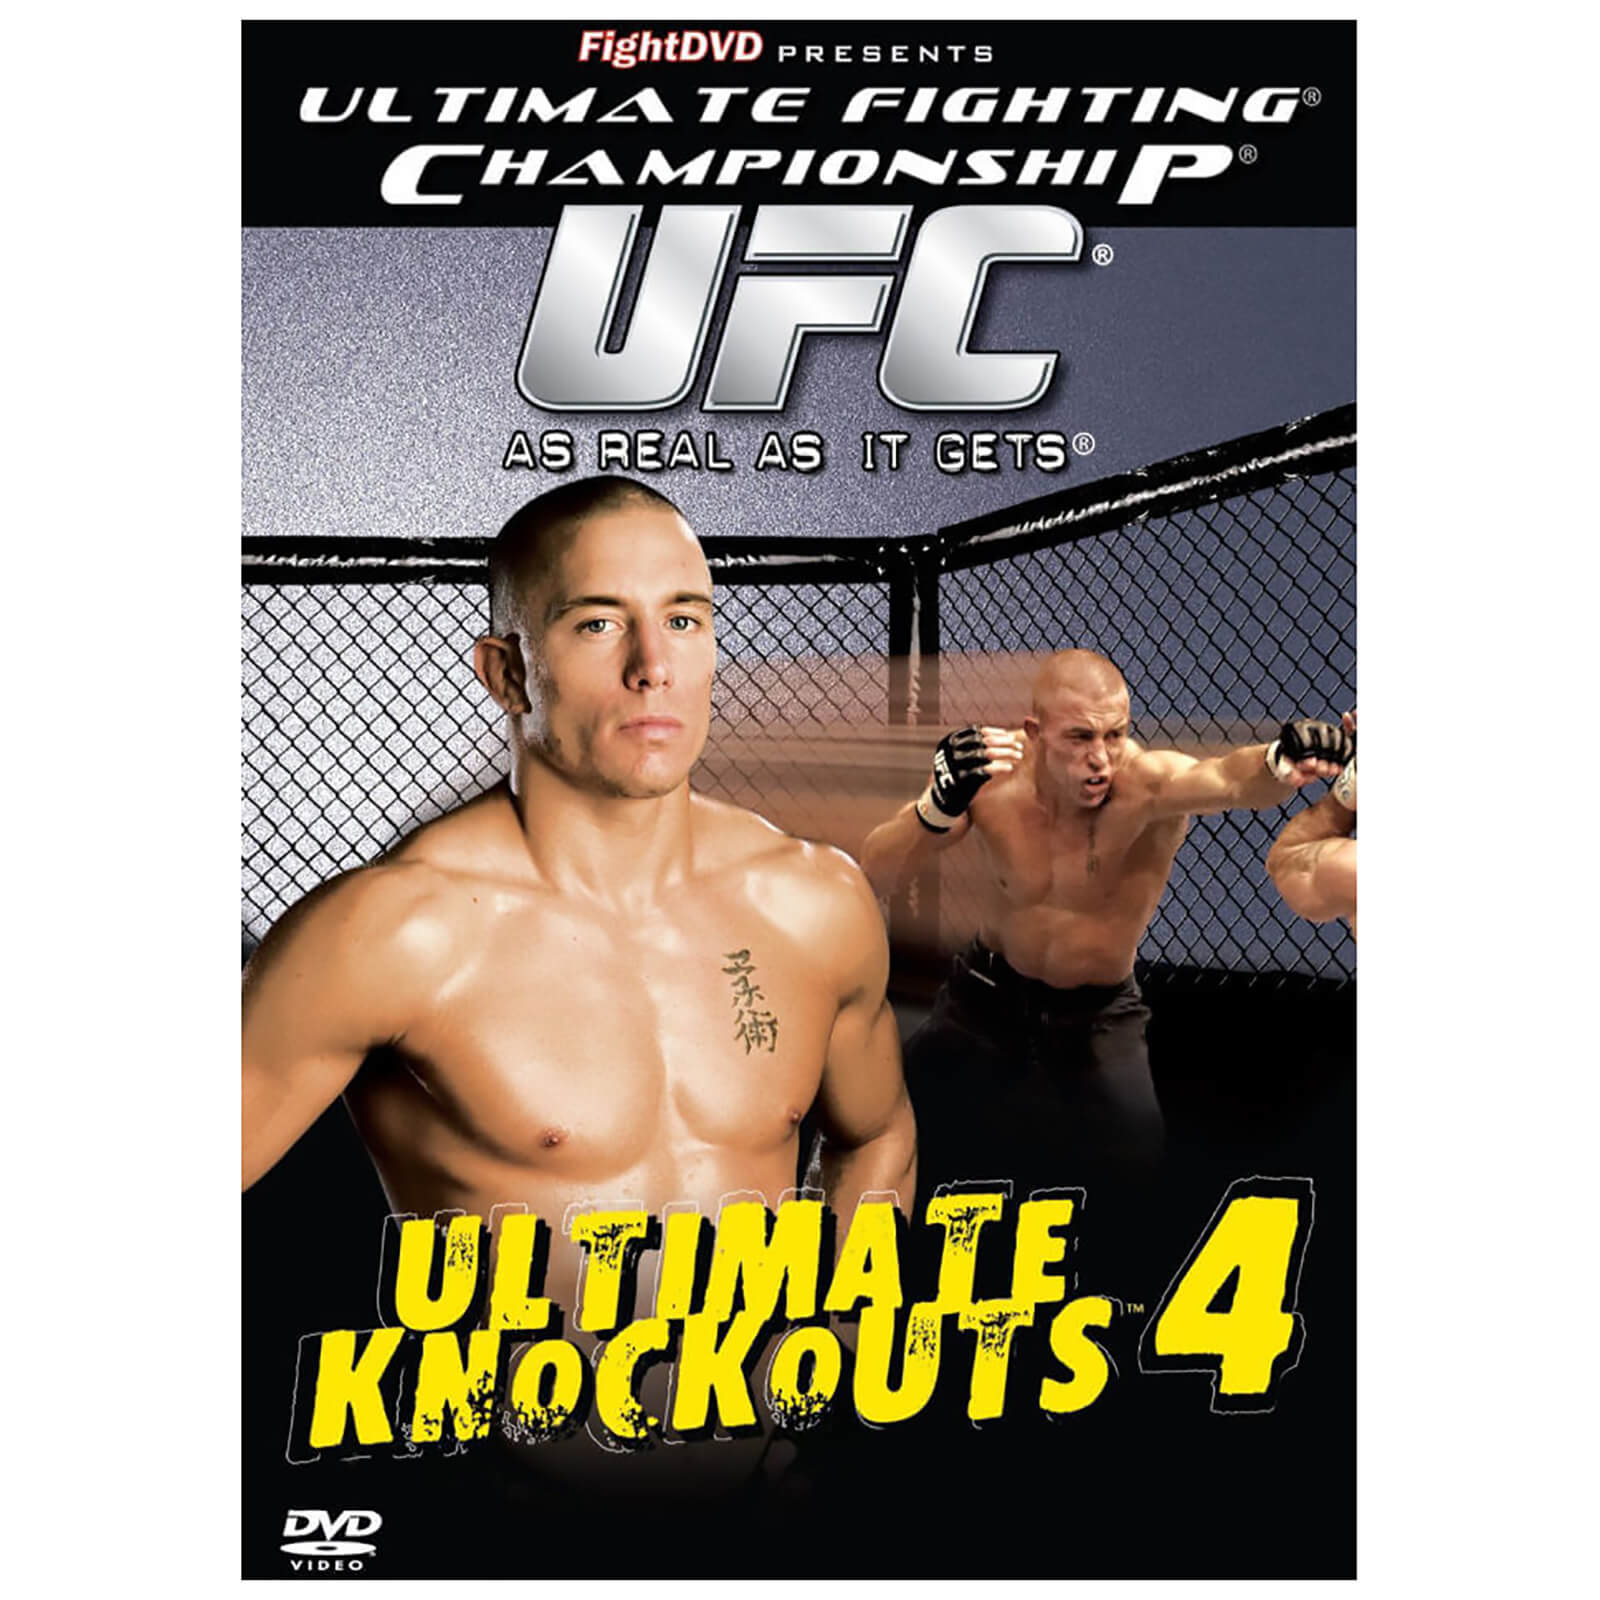 Ultimate Fighting Championship - Ultimate Knockouts 4 von Clear Vision Ltd